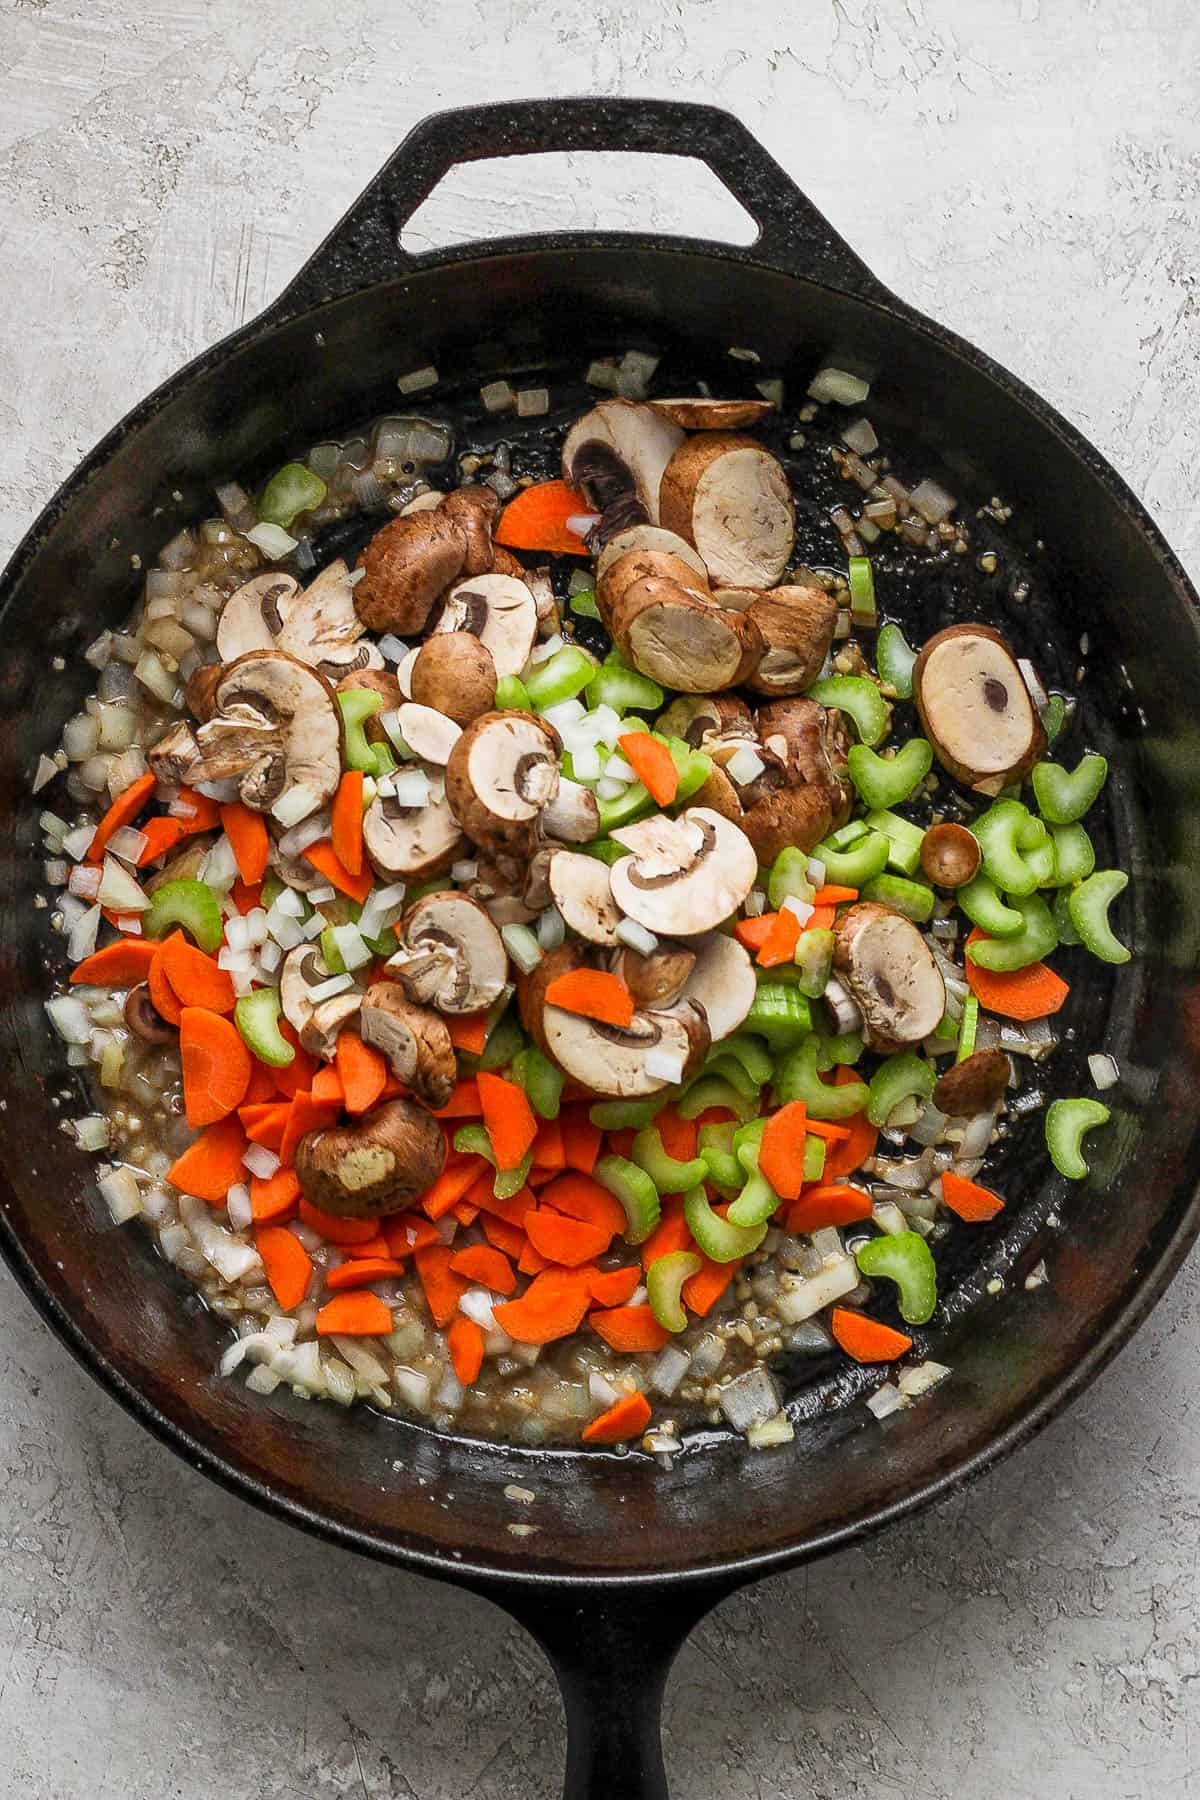 Garlic, butter, celery, carrots, and mushrooms in the cast iron skillet. 